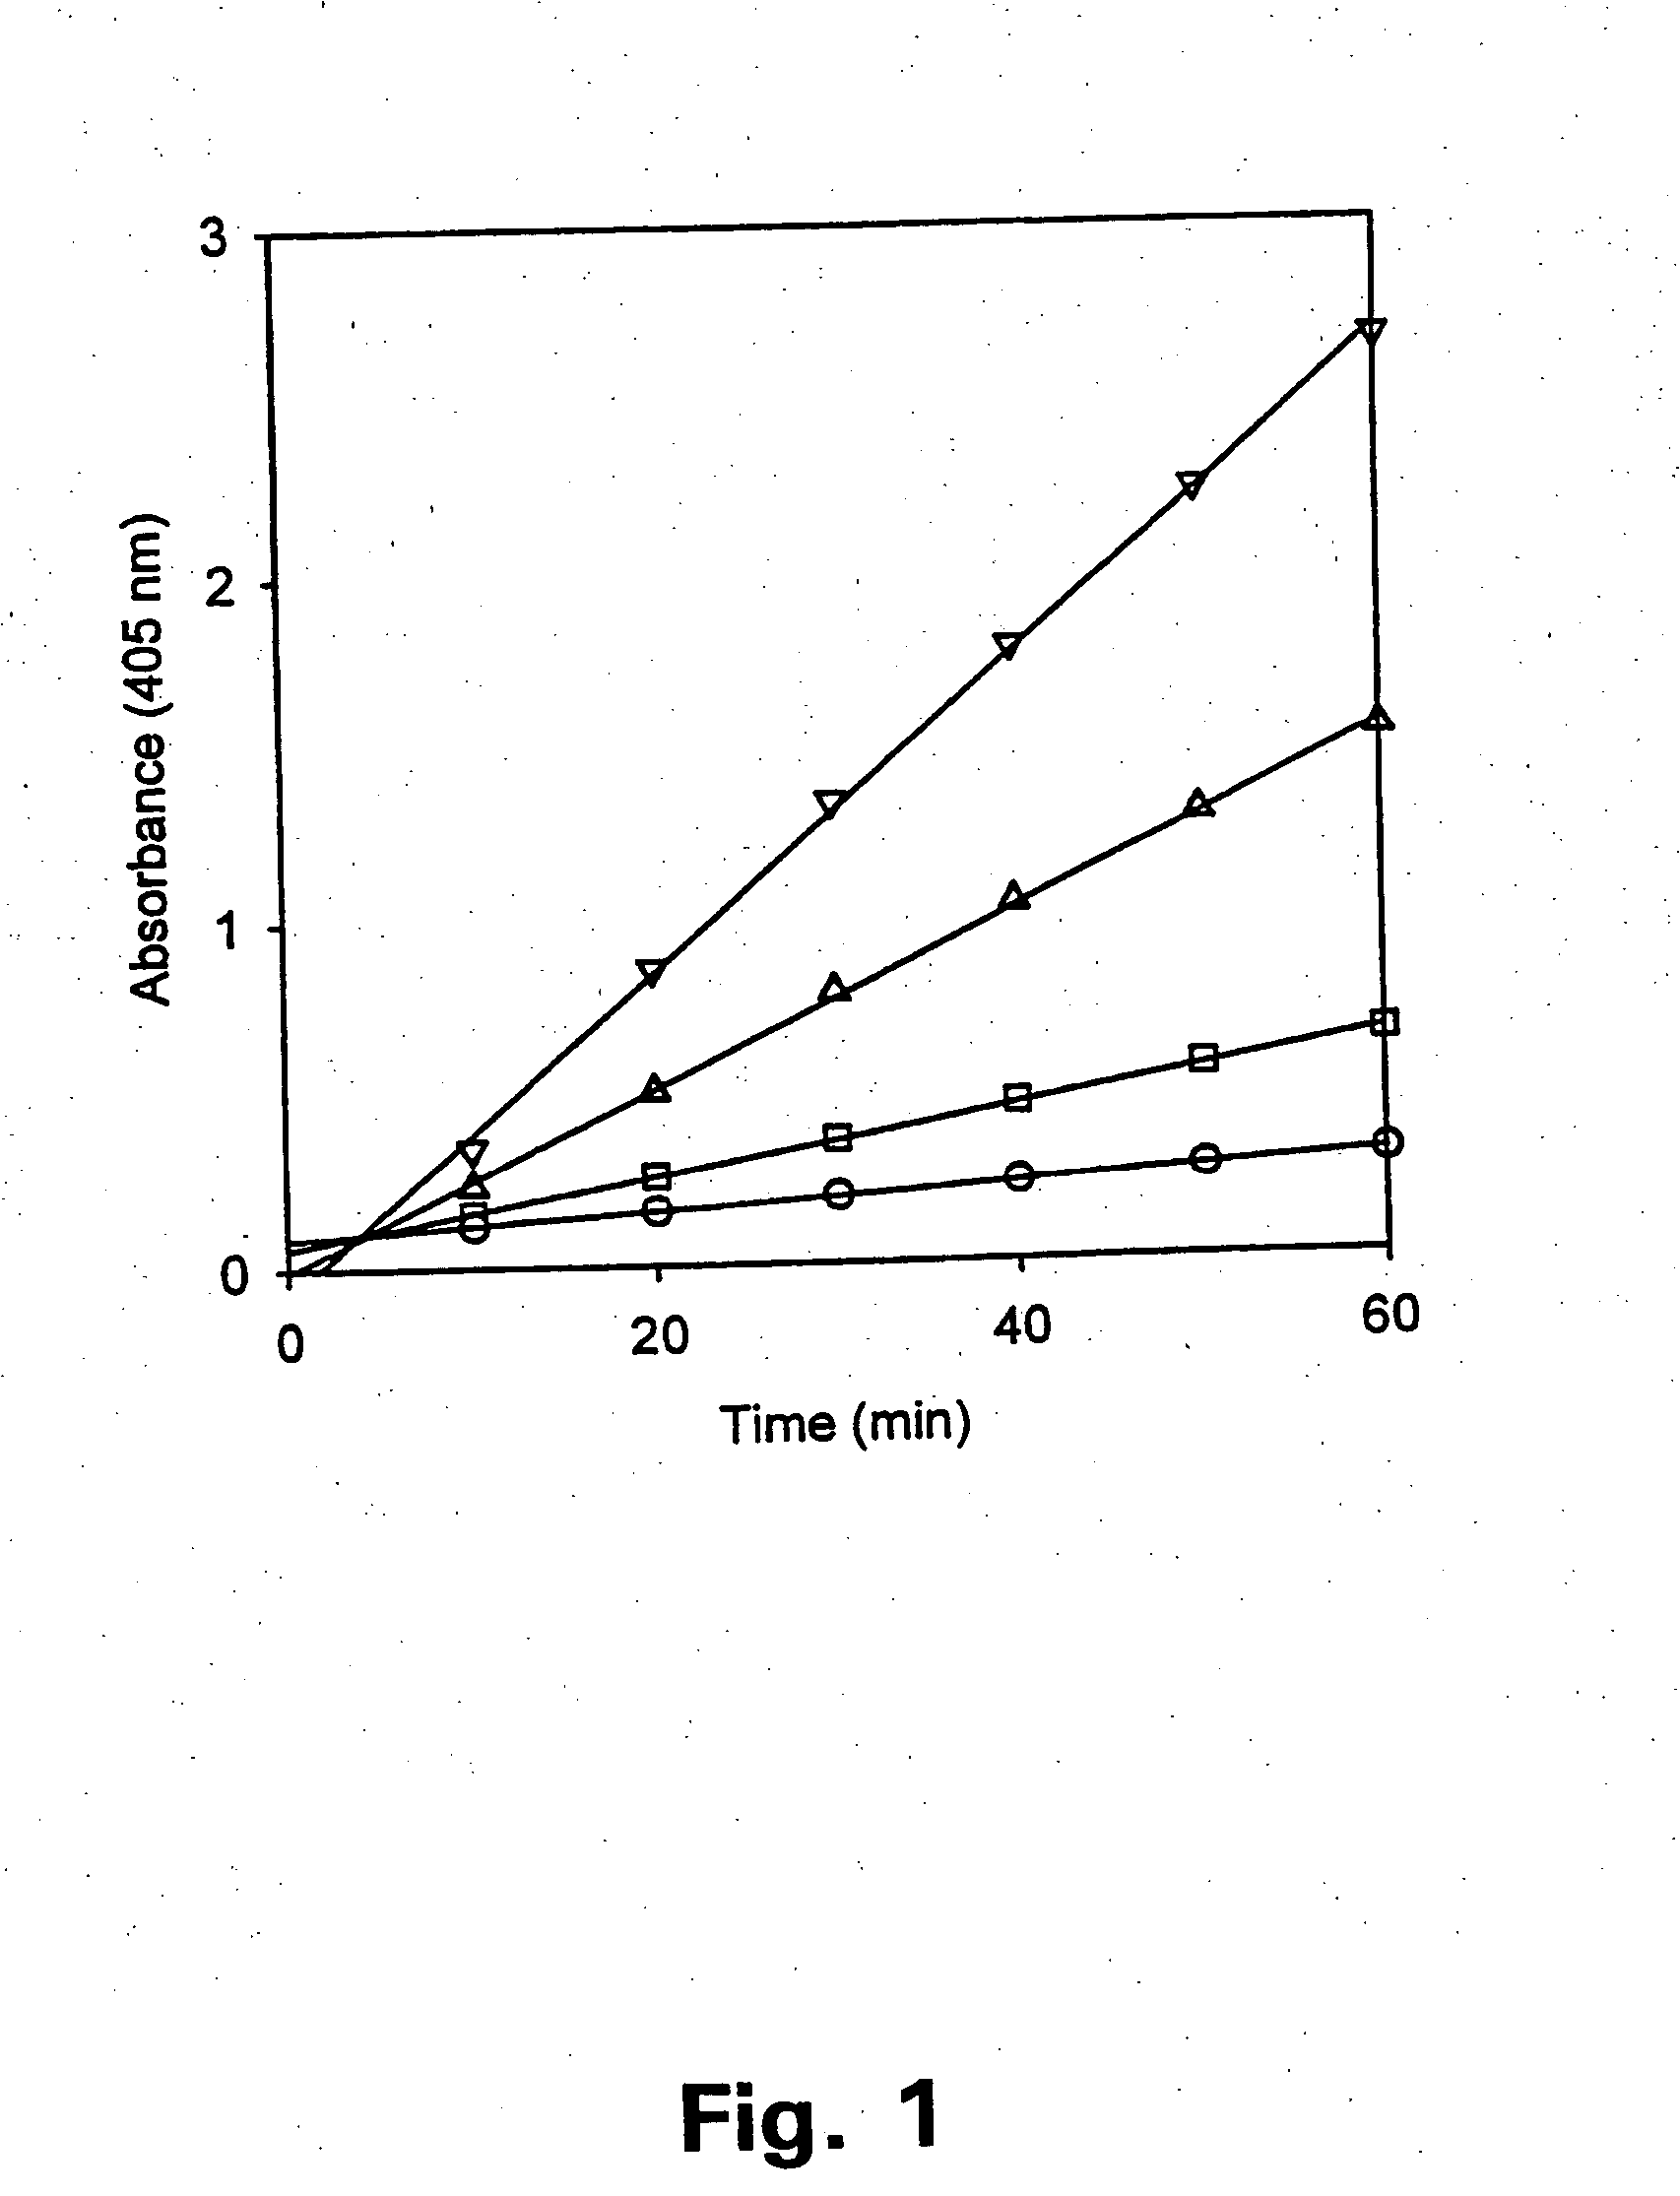 Tissue inhibitor of matrix metalloproteinases type-1 (TIMP-1) as a cancer marker